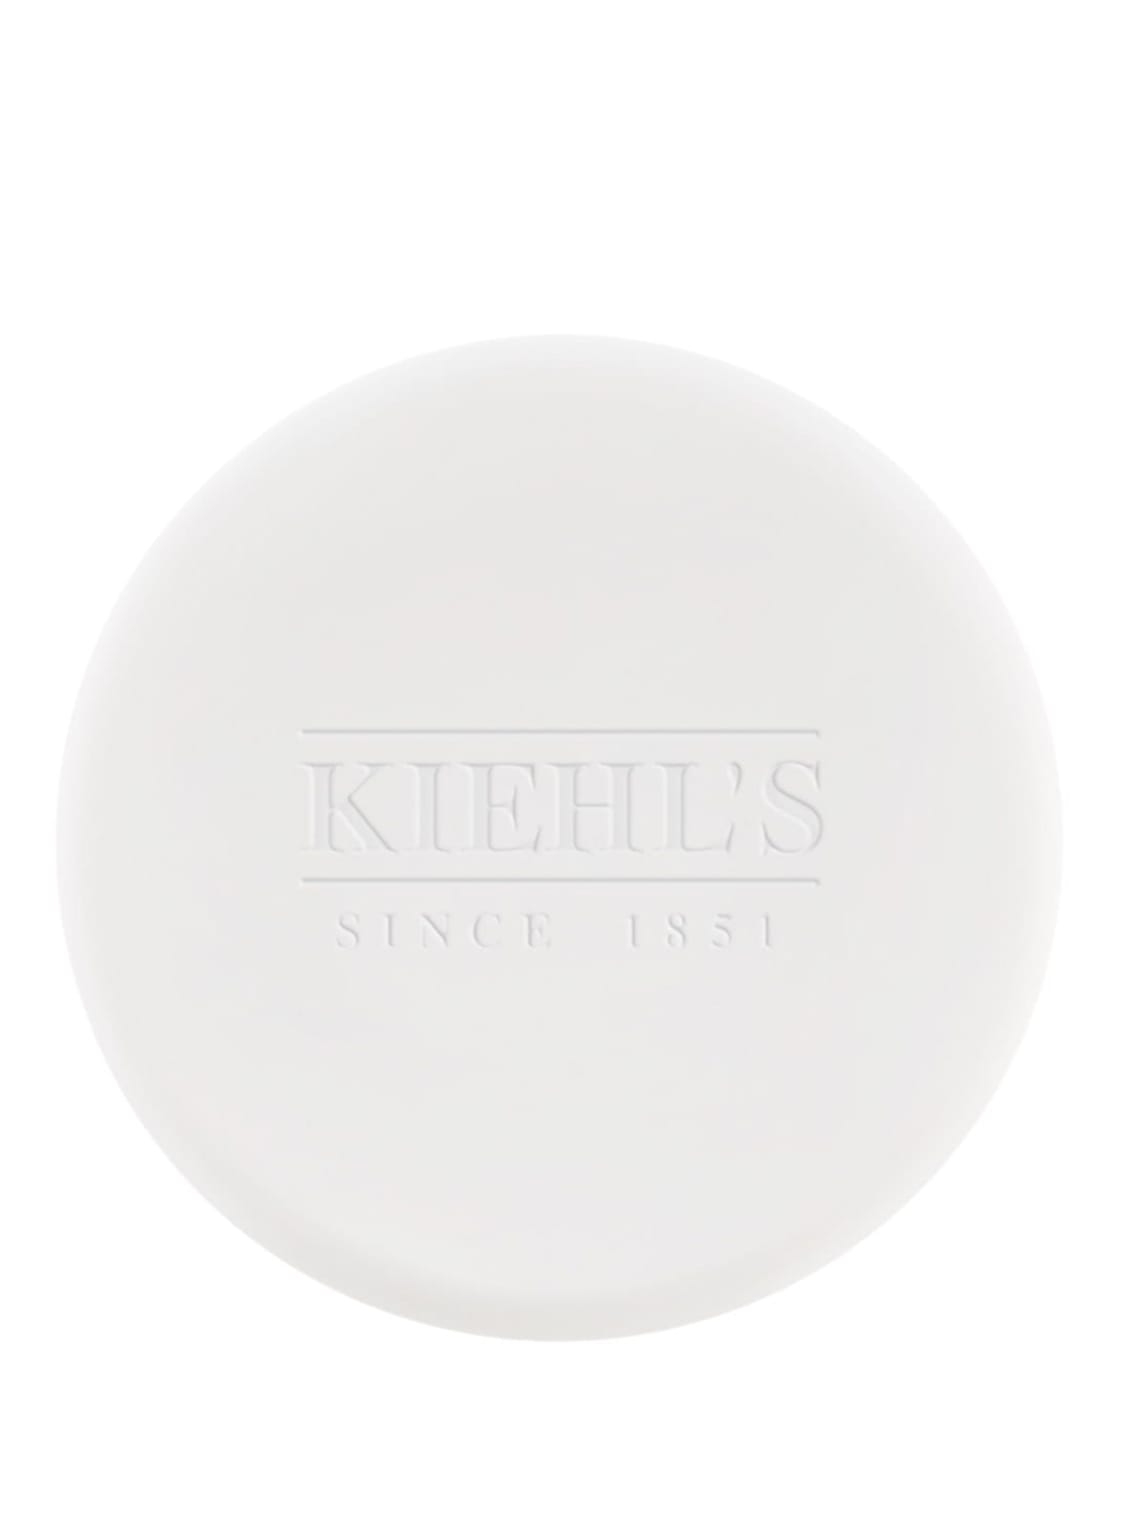 Image of Kiehl's Ultra Facial Cleanse Bar Gesichtsseife 100 g